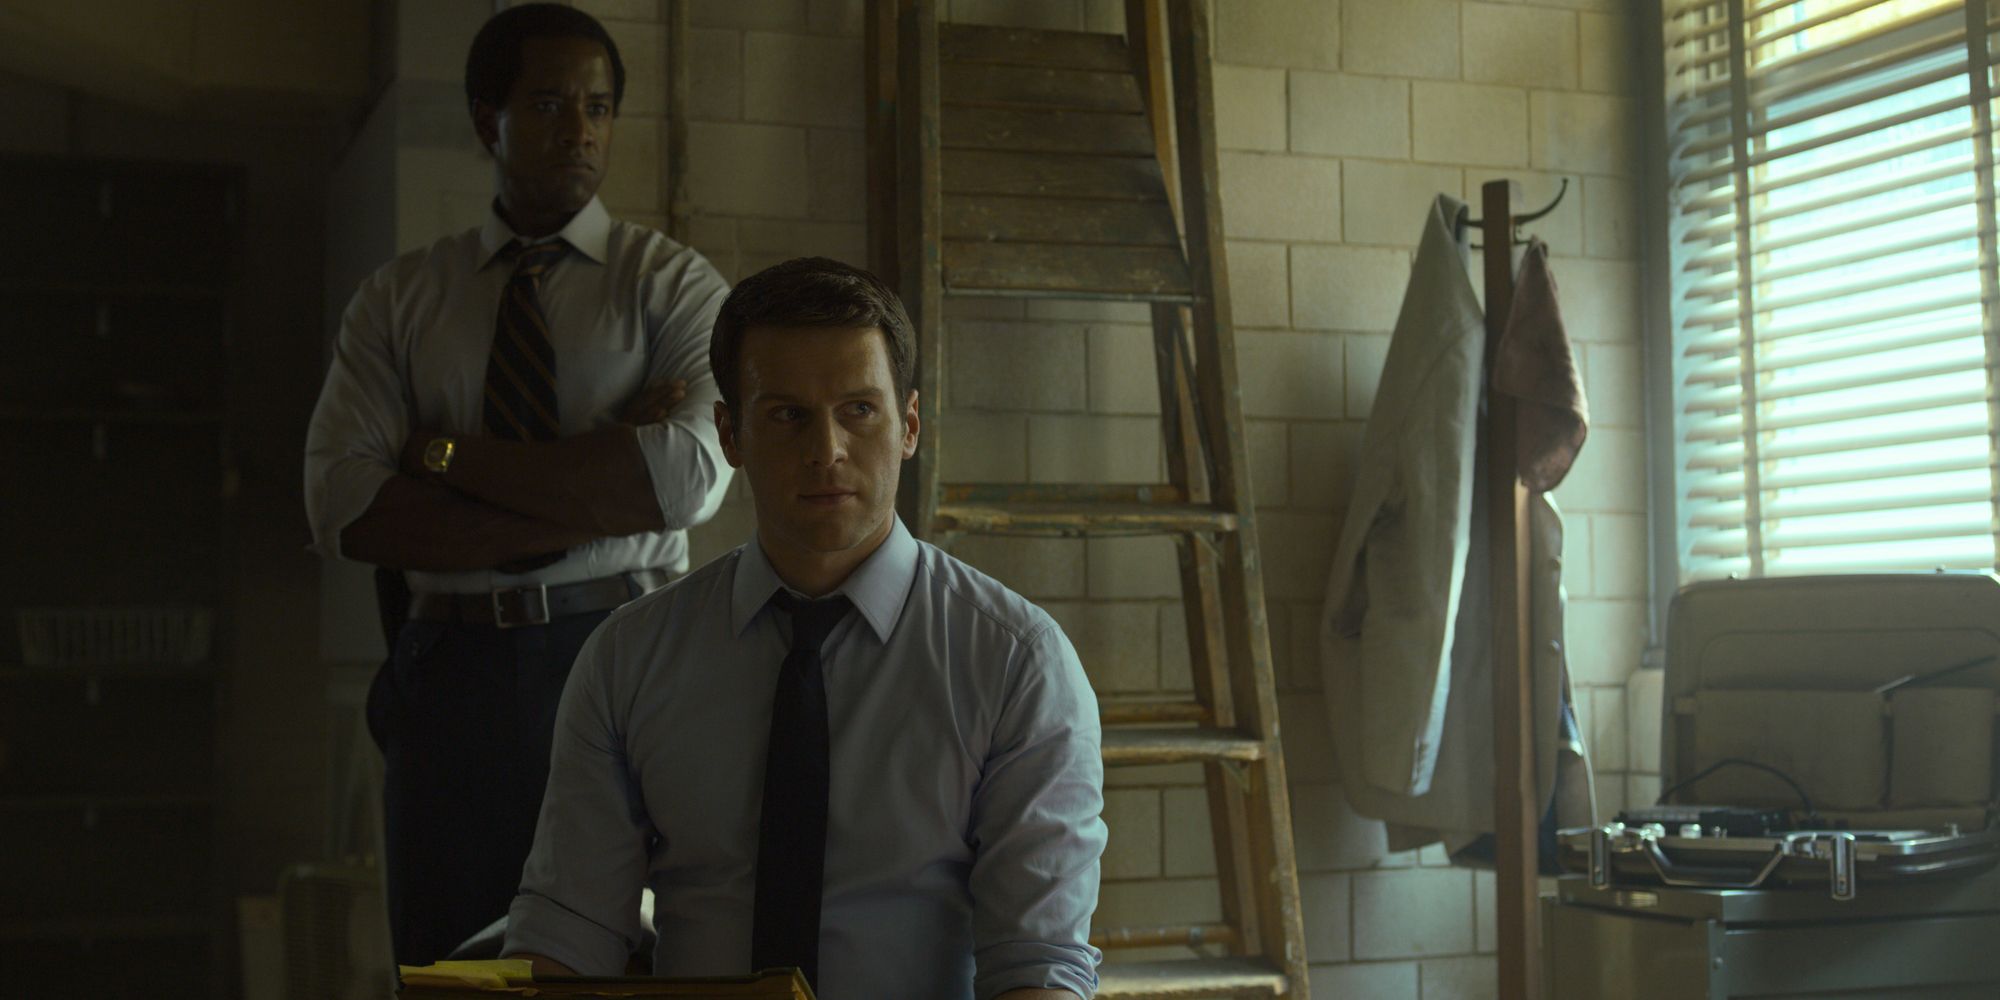 What To Expect From Mindhunter Season 3